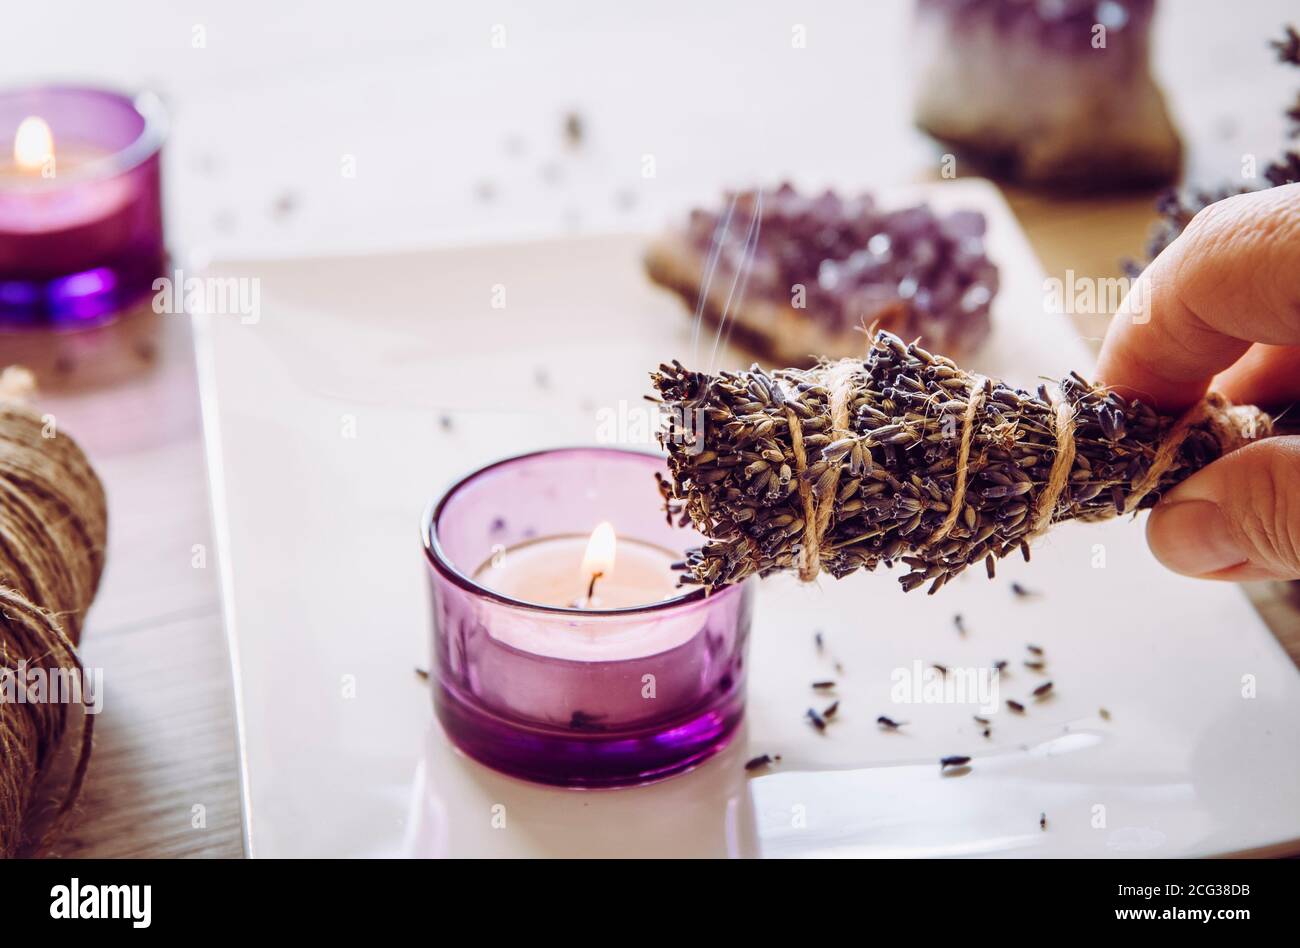 Person holding homemade herbal lavender (lavendula) smudge stick with smoke coming out, candles and amethyst crystal clusters for decoration. Stock Photo